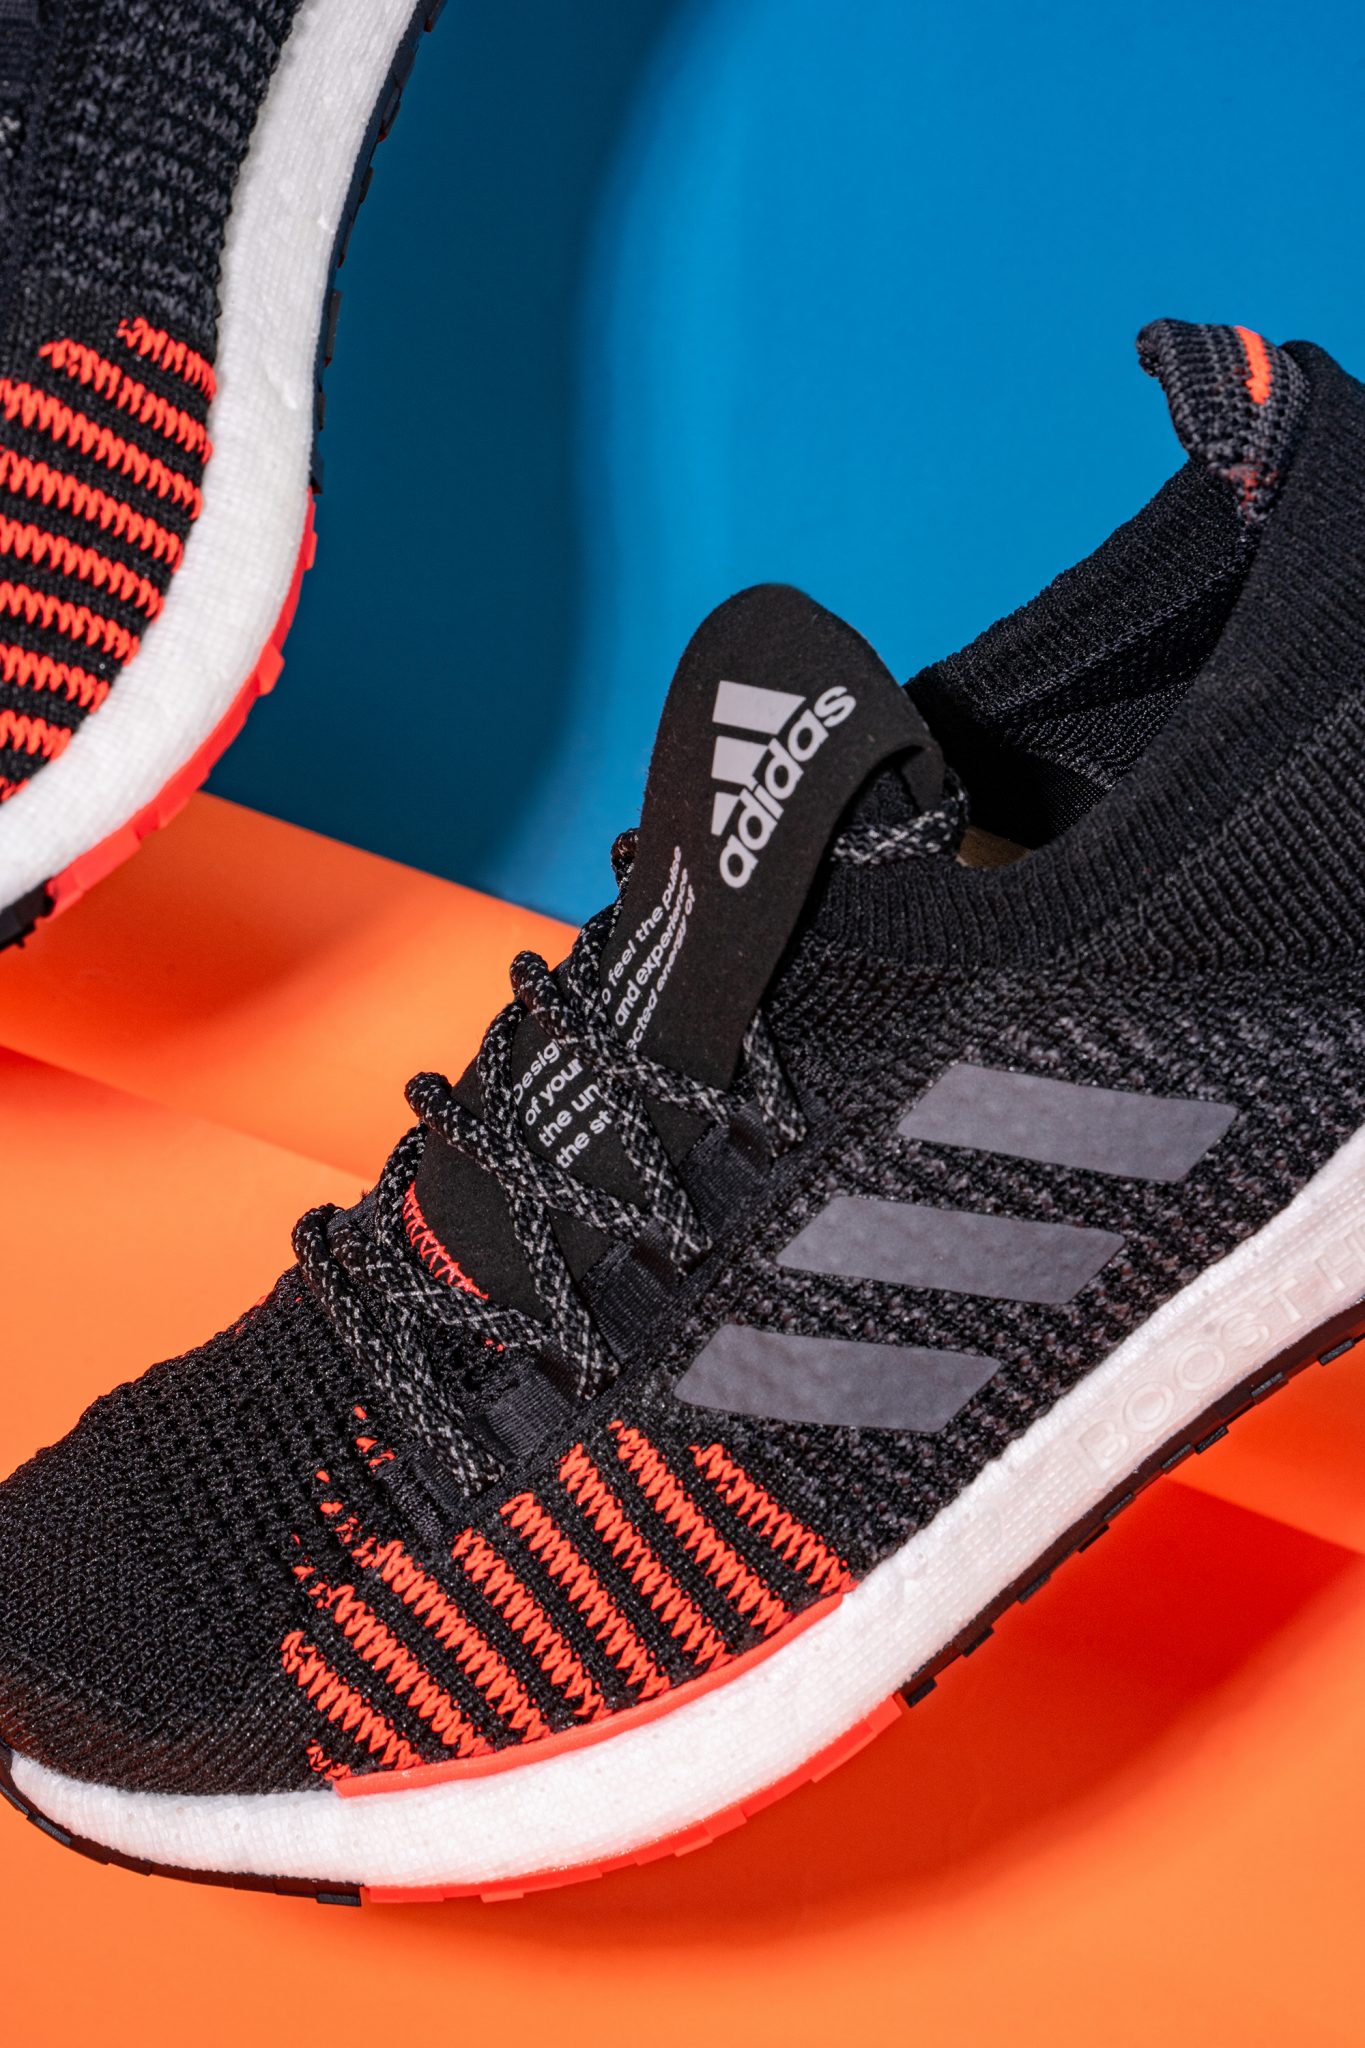 Surprisingly easy to slip into, many will find the Adidas Pulseboost HD as a go-to pair for running, jogging, or even walking